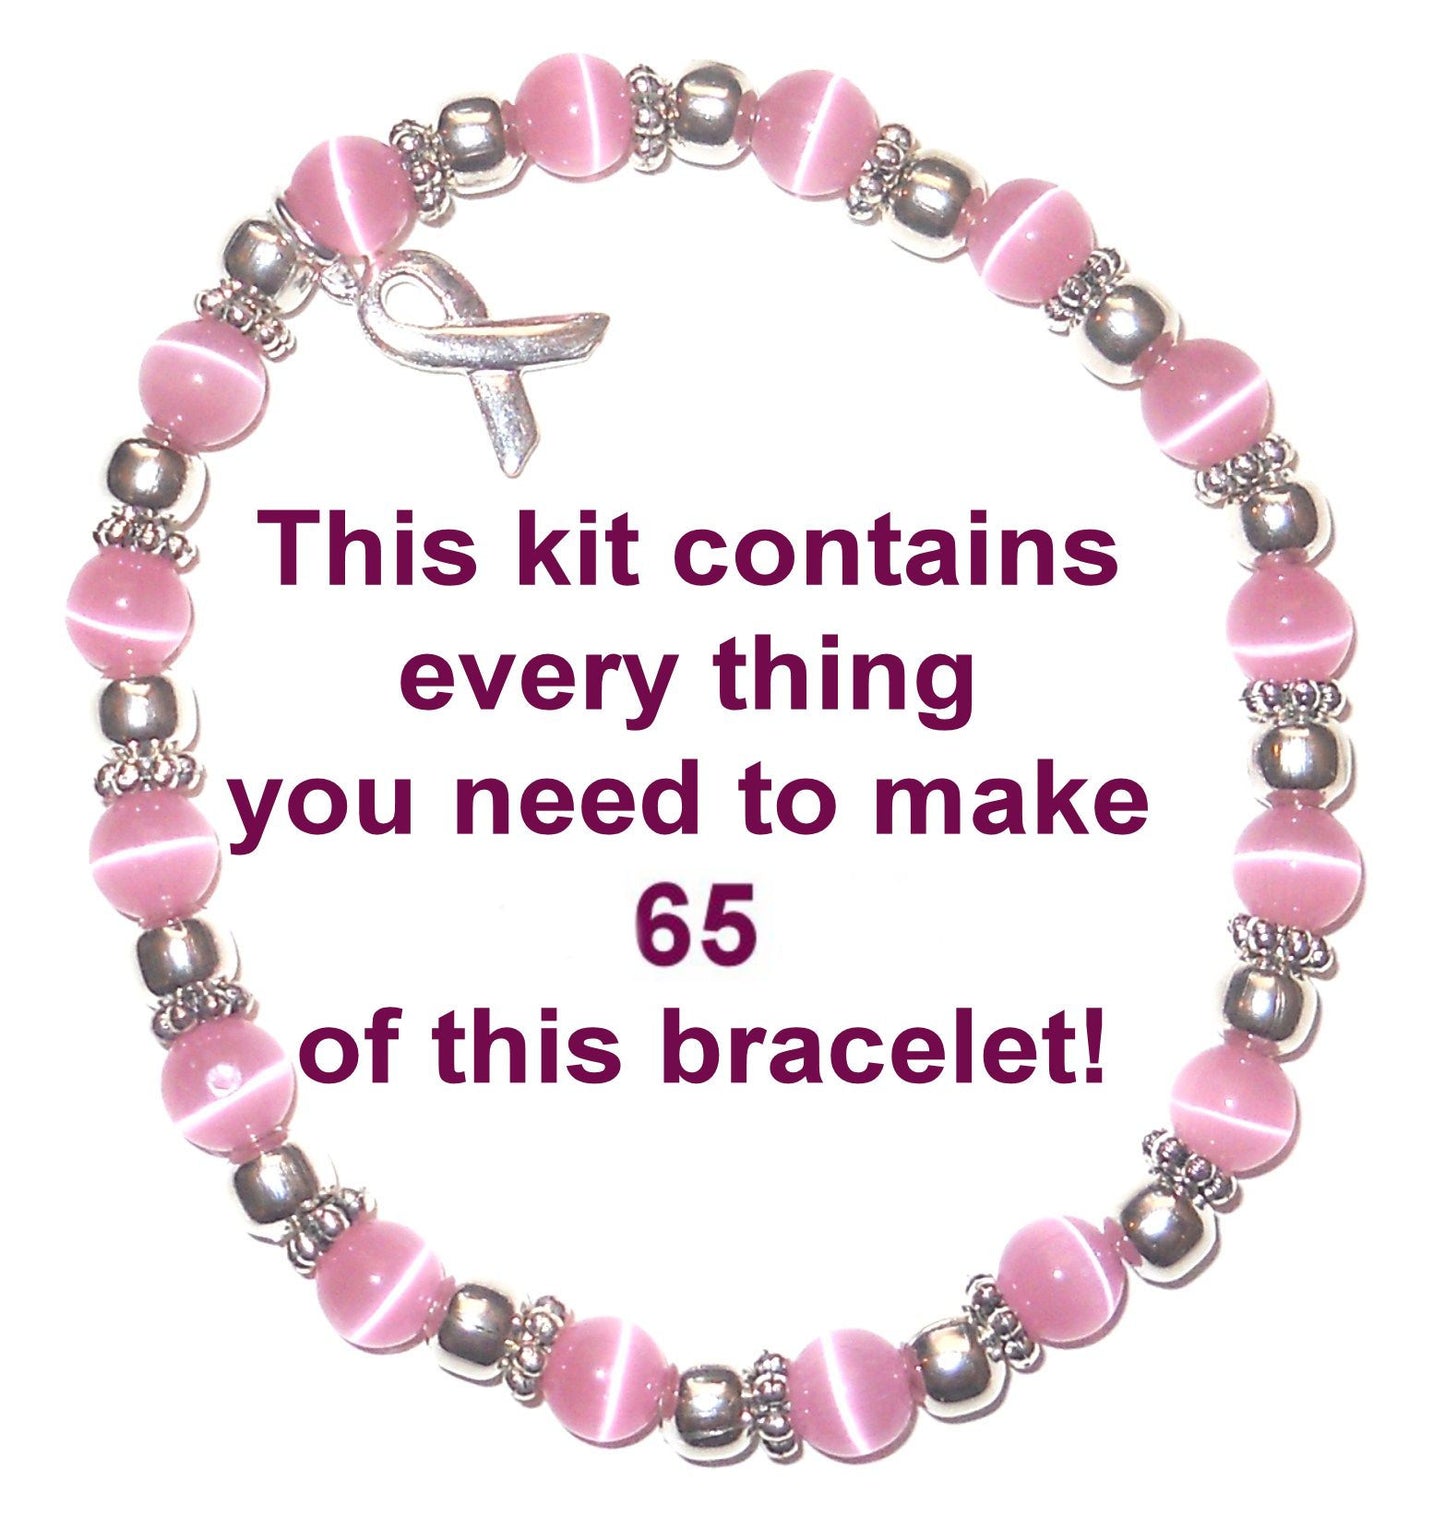 Breast Cancer Awareness Bracelet Kit With Stretch cord 6mm, makes 65